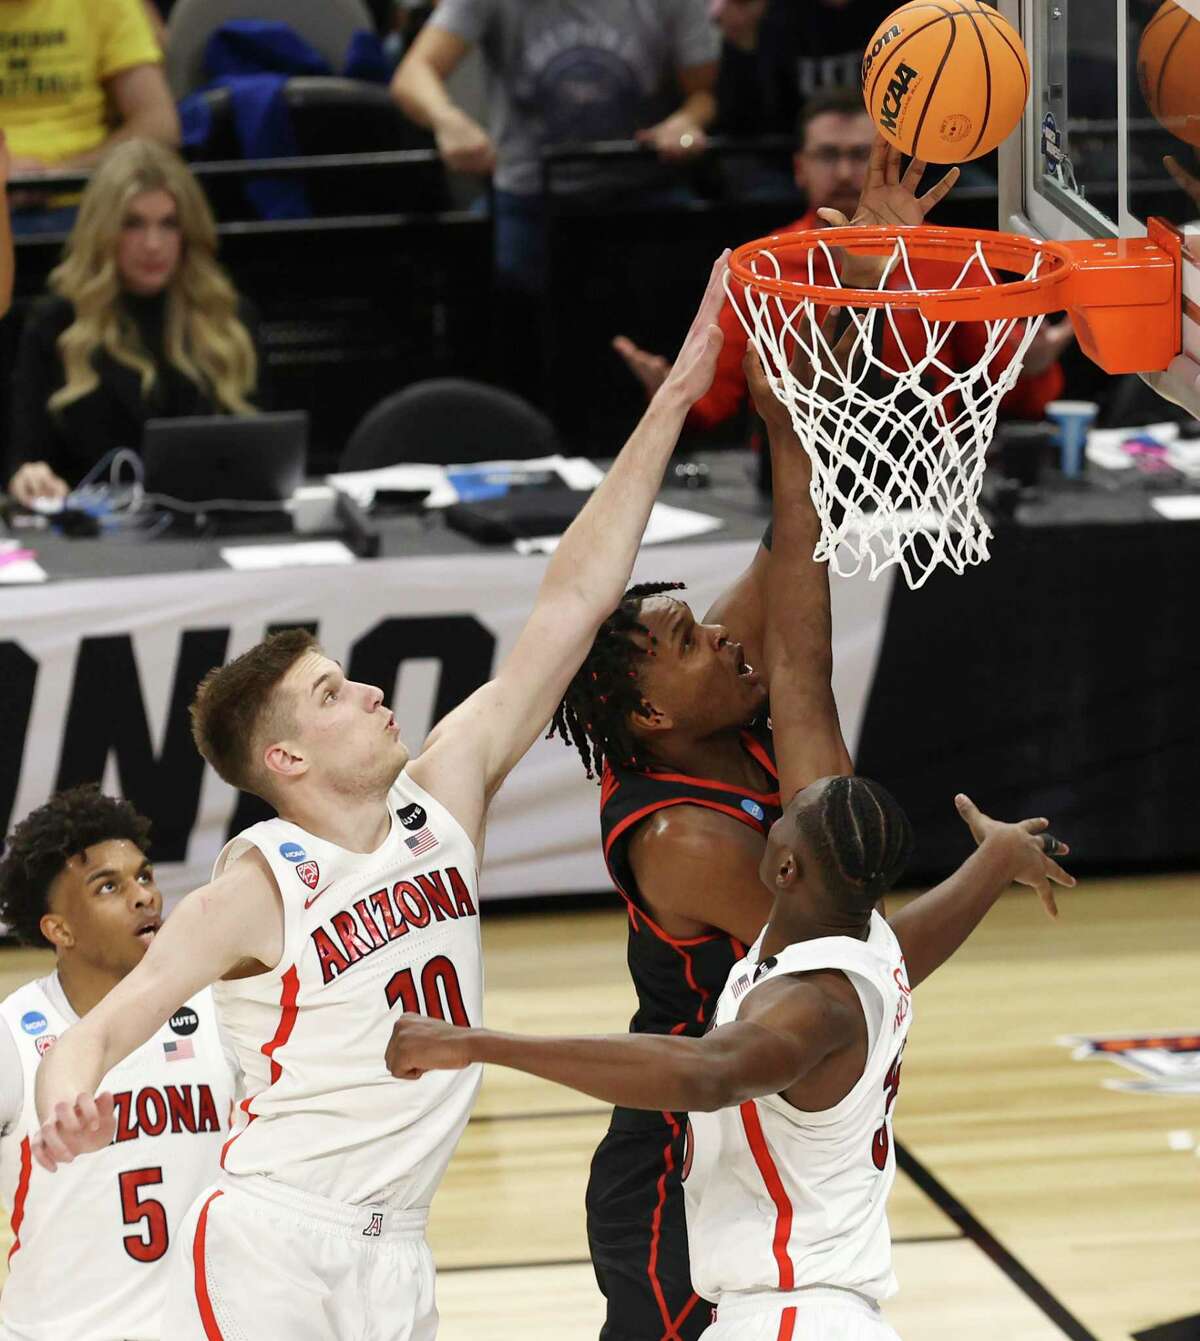 Houston Cougars center Josh Carlton (25) scores against Arizona Wildcats forward Azuolas Tubelis (10) and center Christian Koloko (35) during their game in the South Regional semifinal round of the NCAA Men's Basketball tournament at the AT&T Center on Thursday, Mar. 24, 2022.